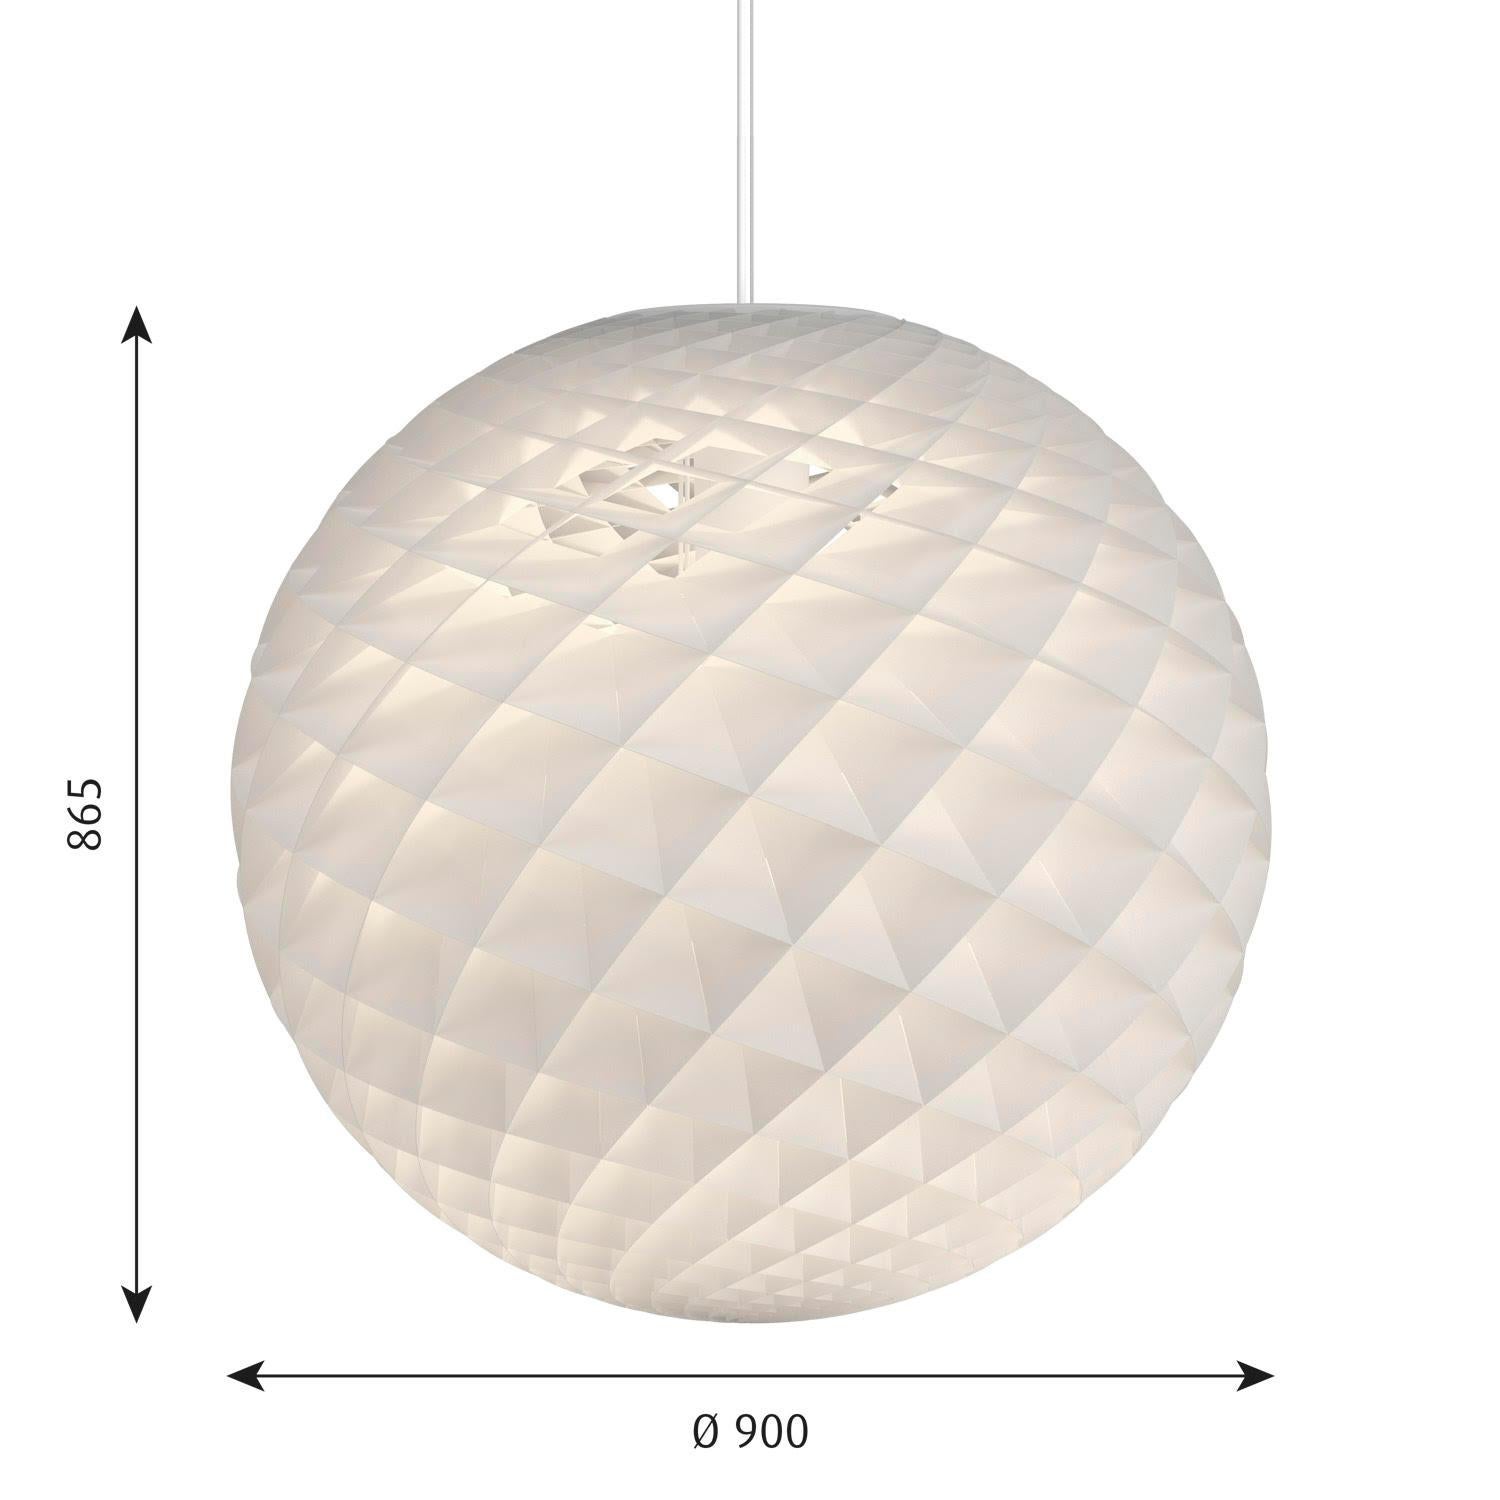 Louis Poulsen D900 Patere Round Chandelier

Patera is composed of a series of alveoli whose angles are carefully calculated to produce this incredible interaction between light and shadow. The shape of the lamp guarantees glare-free light at all